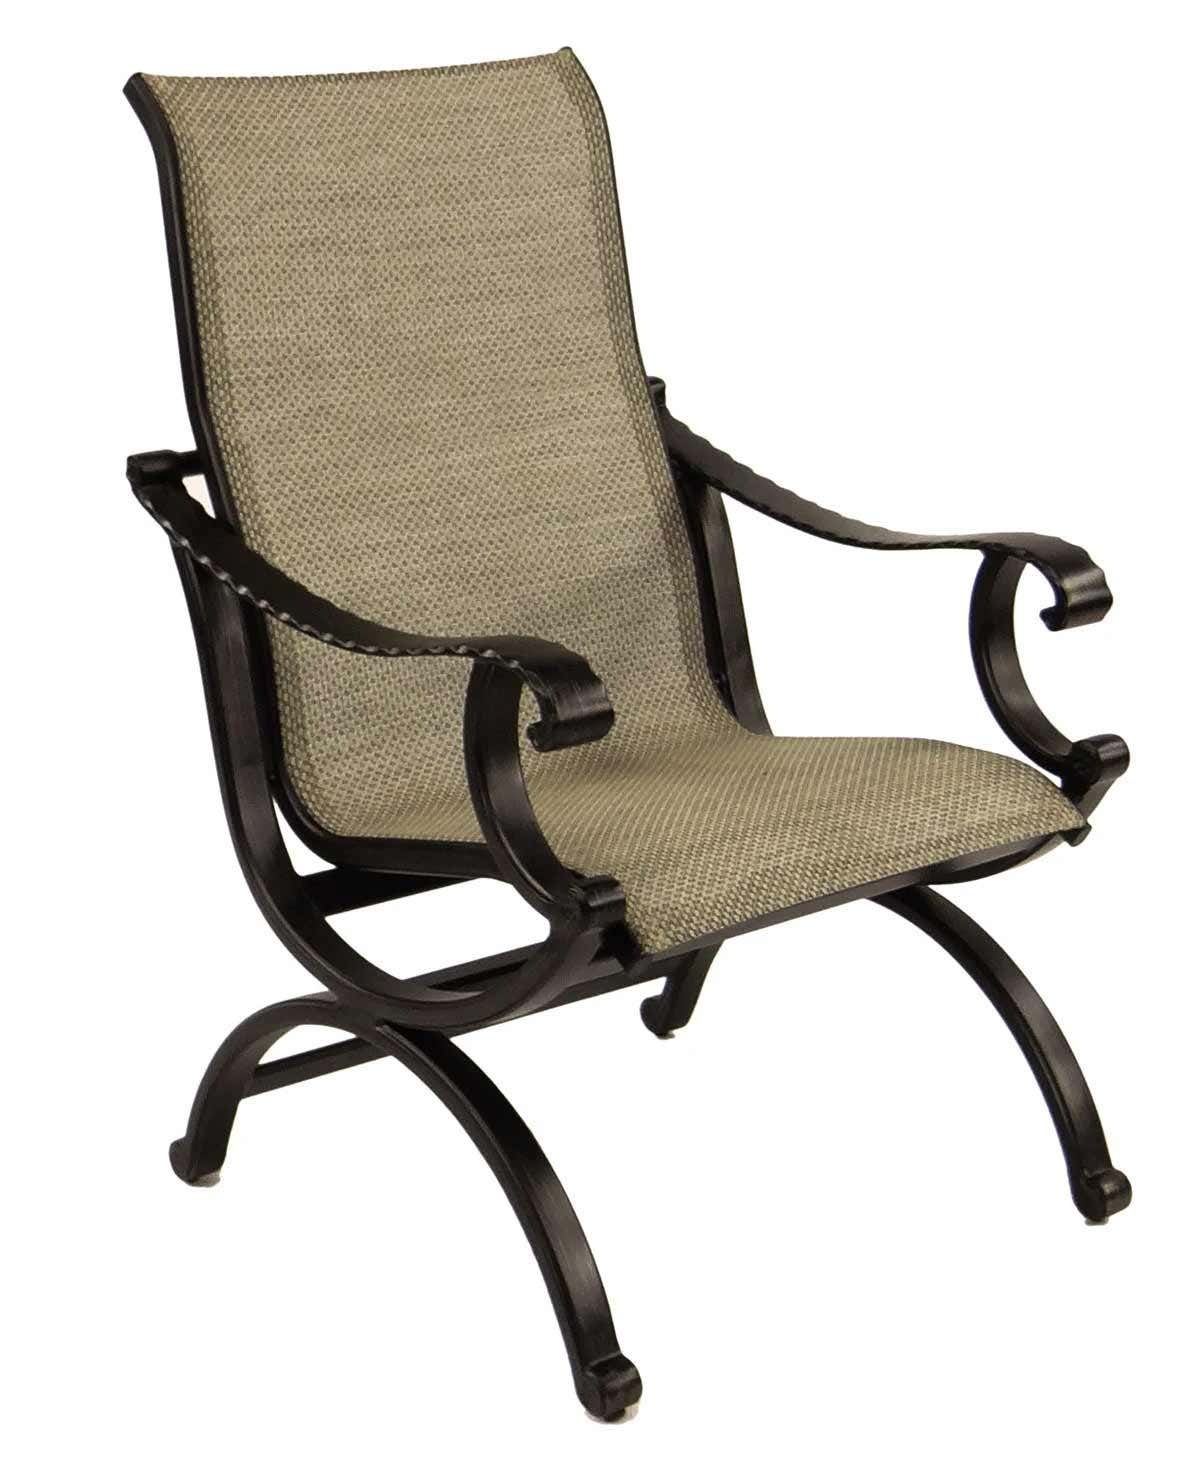 Castelle Telluride Sling Dining Chair with Antique Walnut Frame and Sailing Sahara Fabric Outdoor Chairs 12029366